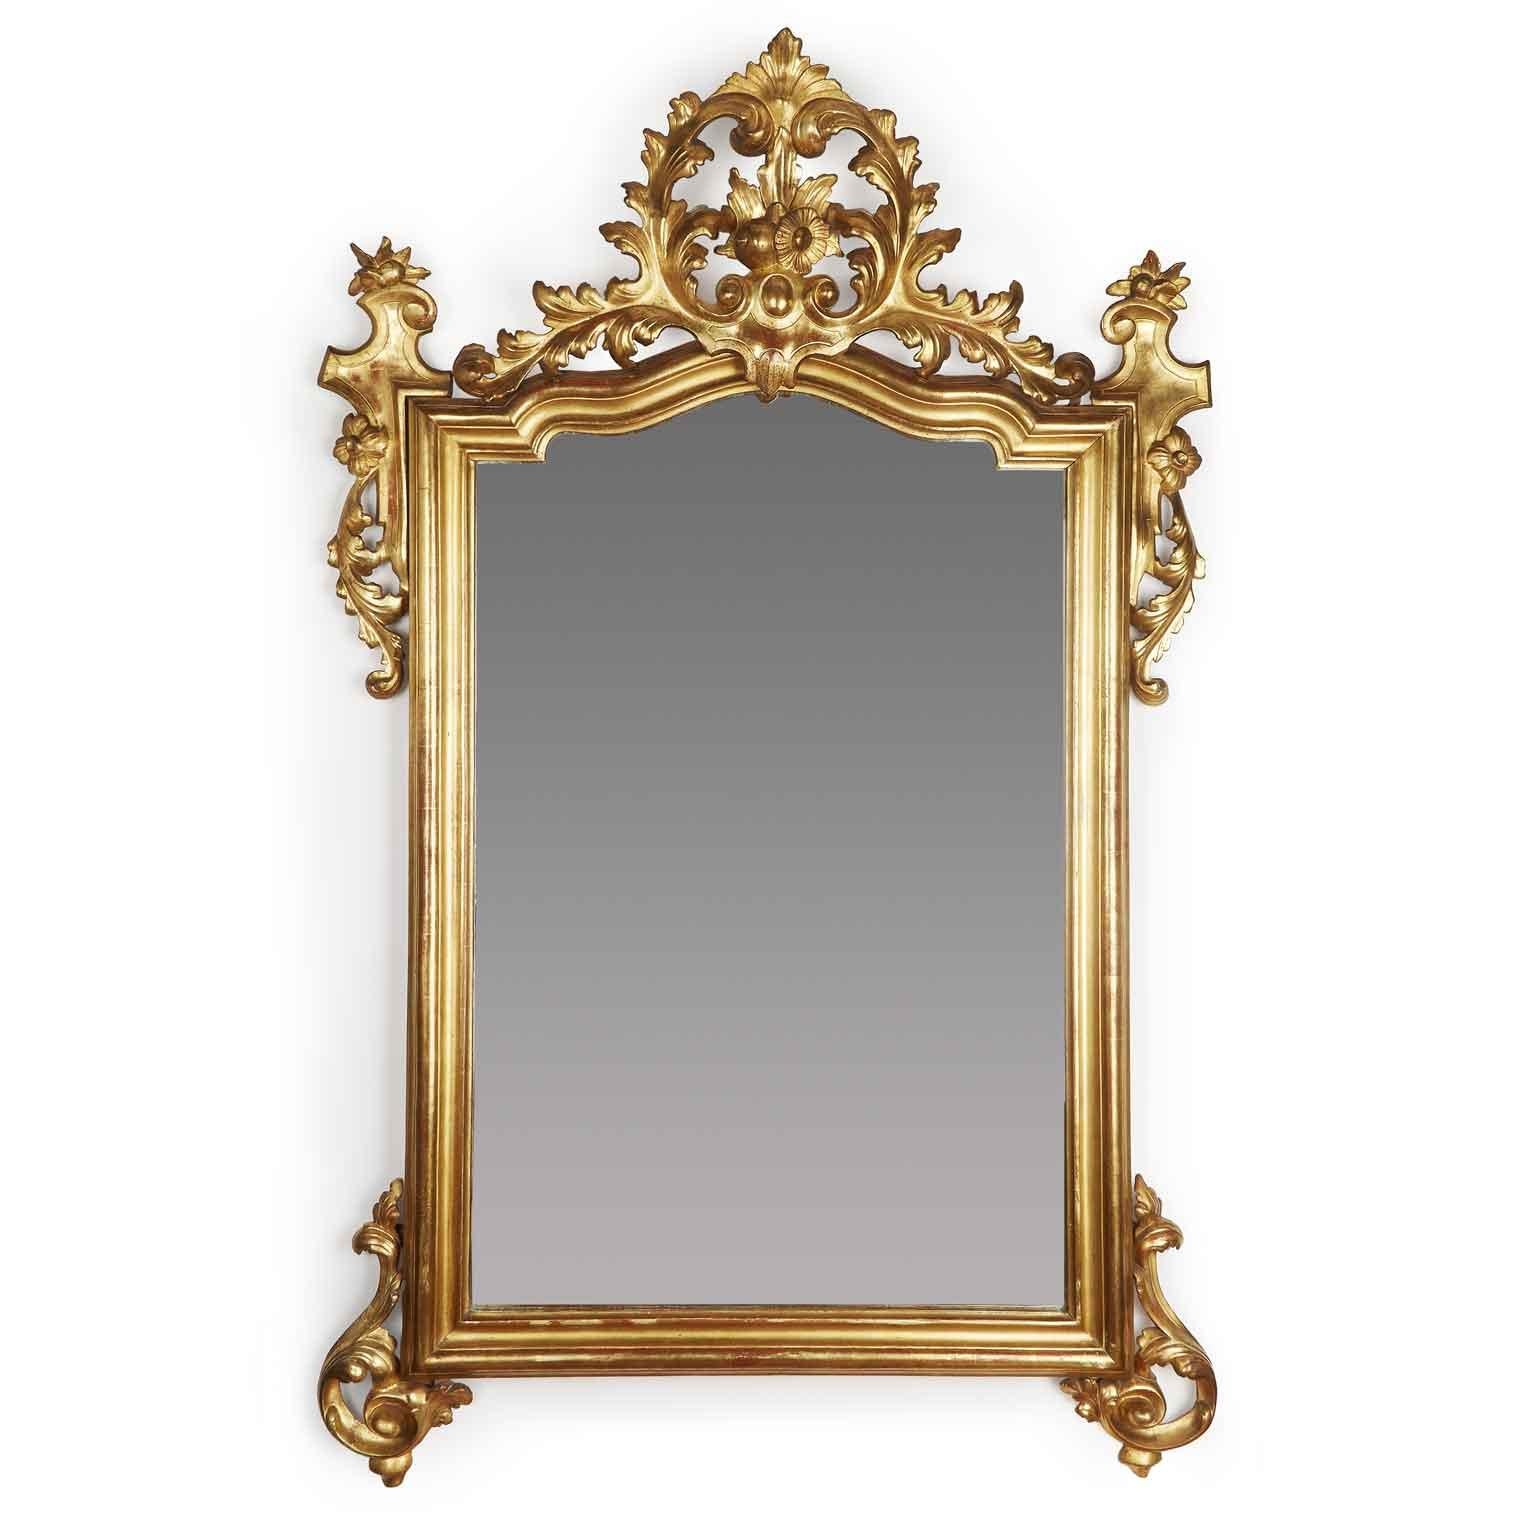 From Italy a stunning pair of Italian 19th century Louis Philippe Neapolitan mirrors, scrolling and floral carving and beautiful gilding, in good condition.
Each mirror has a straight bottom border and top shaped moulded giltwood frame. The frames